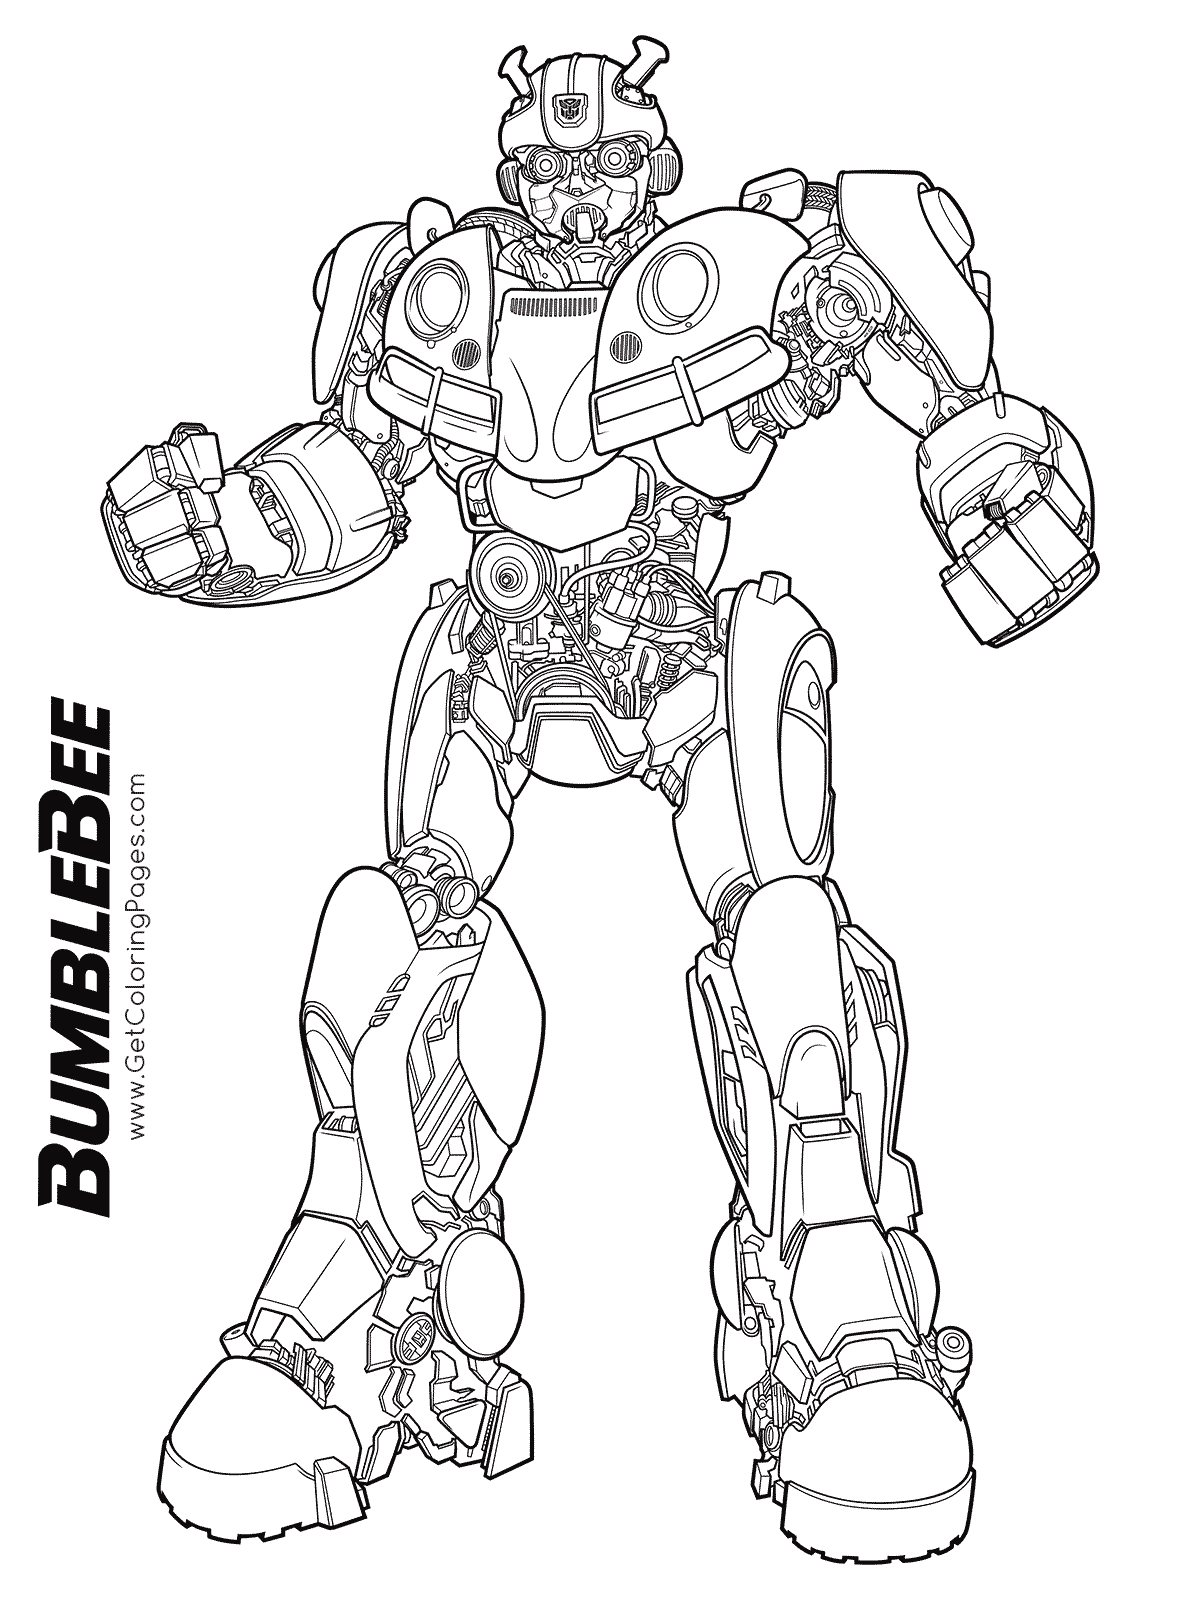 Bumblebee Transformers Sheets Coloring Page